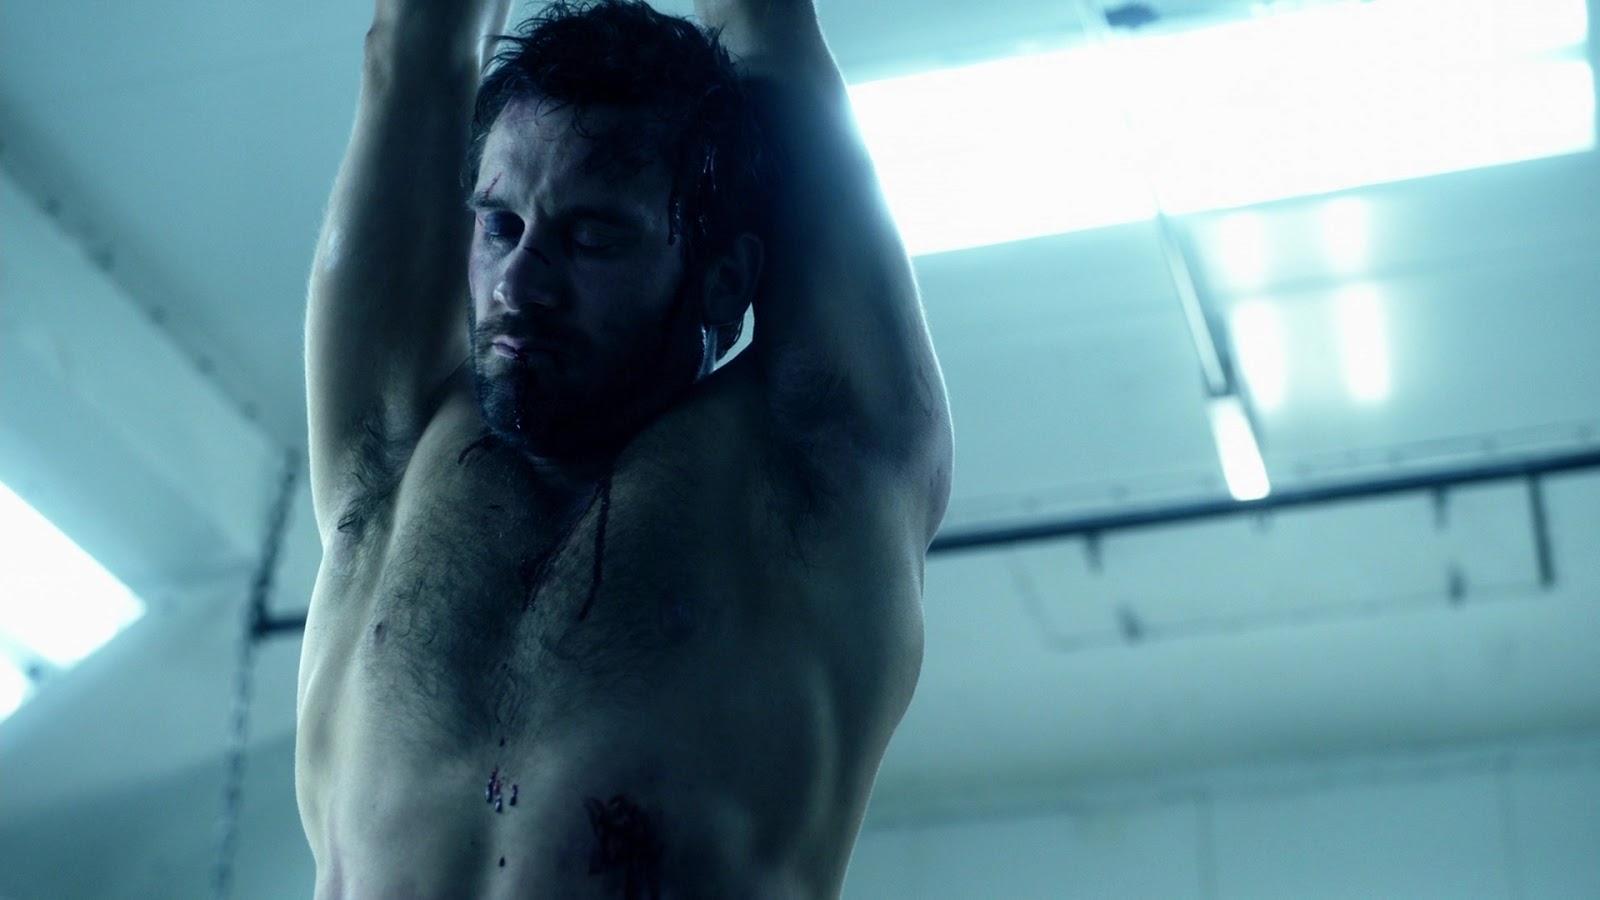 Clive Standen shirtless in Taken 1-07 "Solo" .